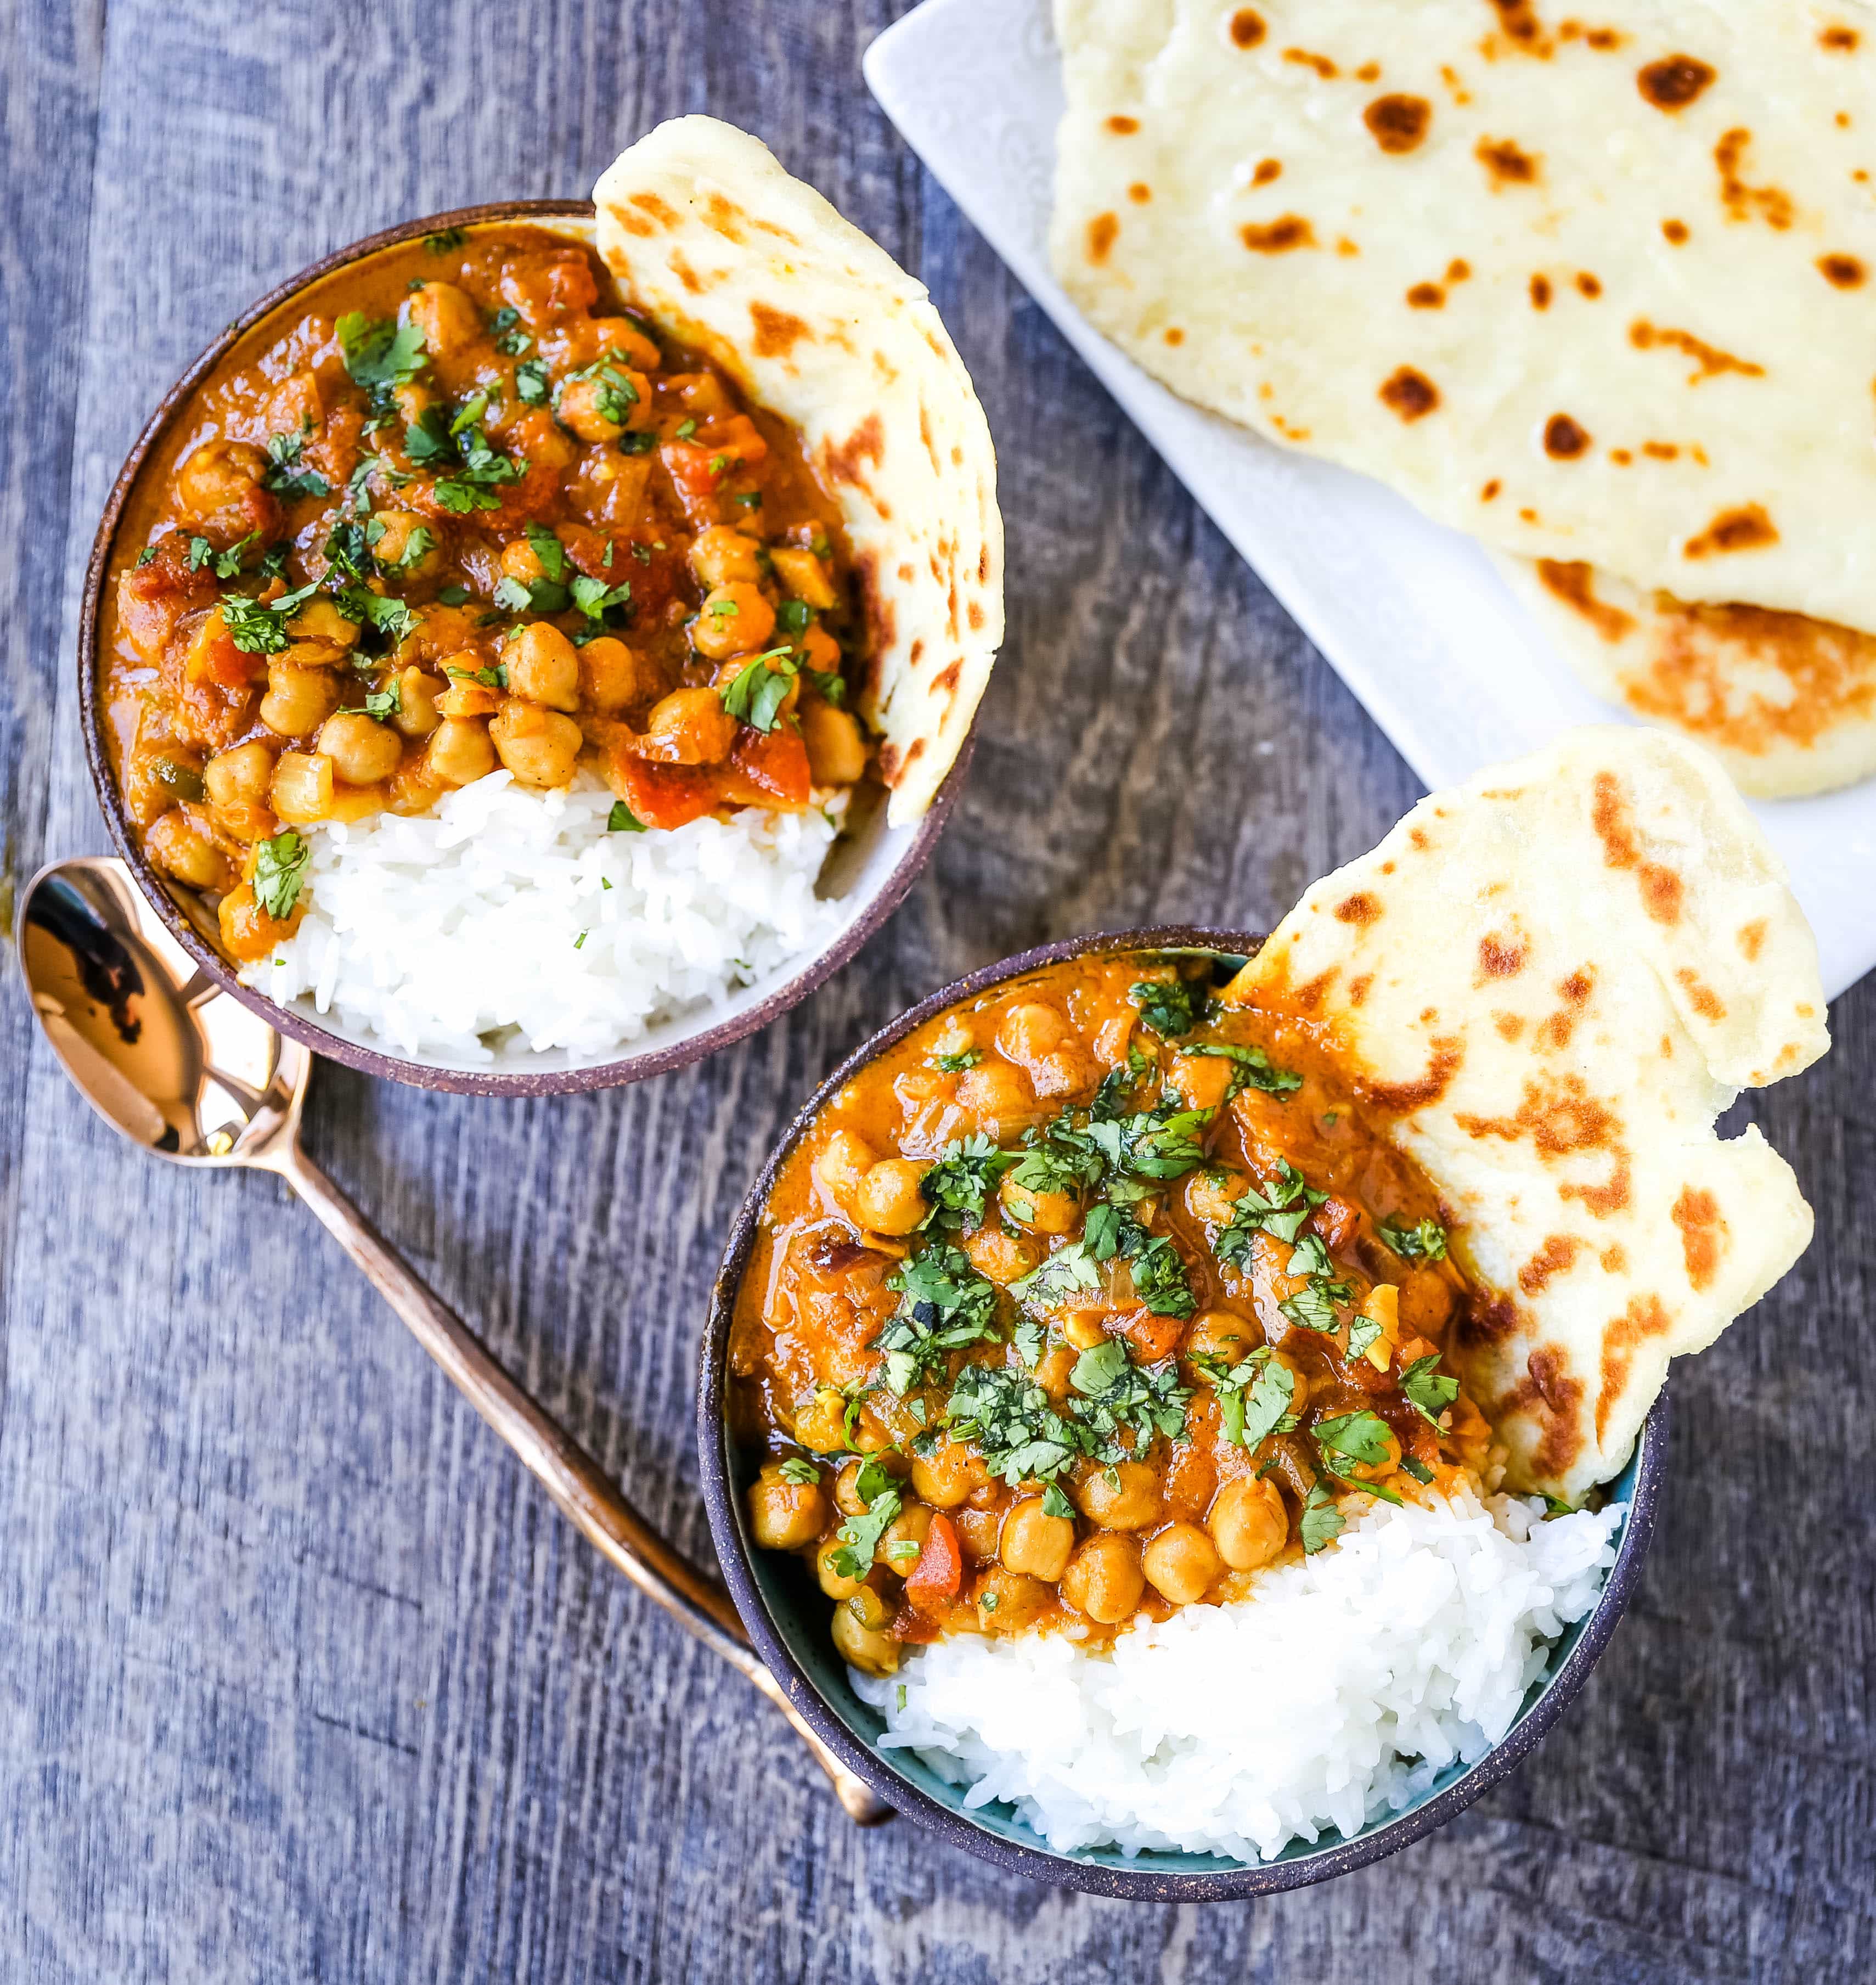 Coconut Chickpea Curry A rich coconut curry broth with onion, garlic, ginger, Indian spices in coconut milk and tossed with chickpeas. Flavorful vegan meal and you won't even miss the meat!  www.modernhoney.com #vegan #curry #indianfood #vegancurry #chickpeacurry